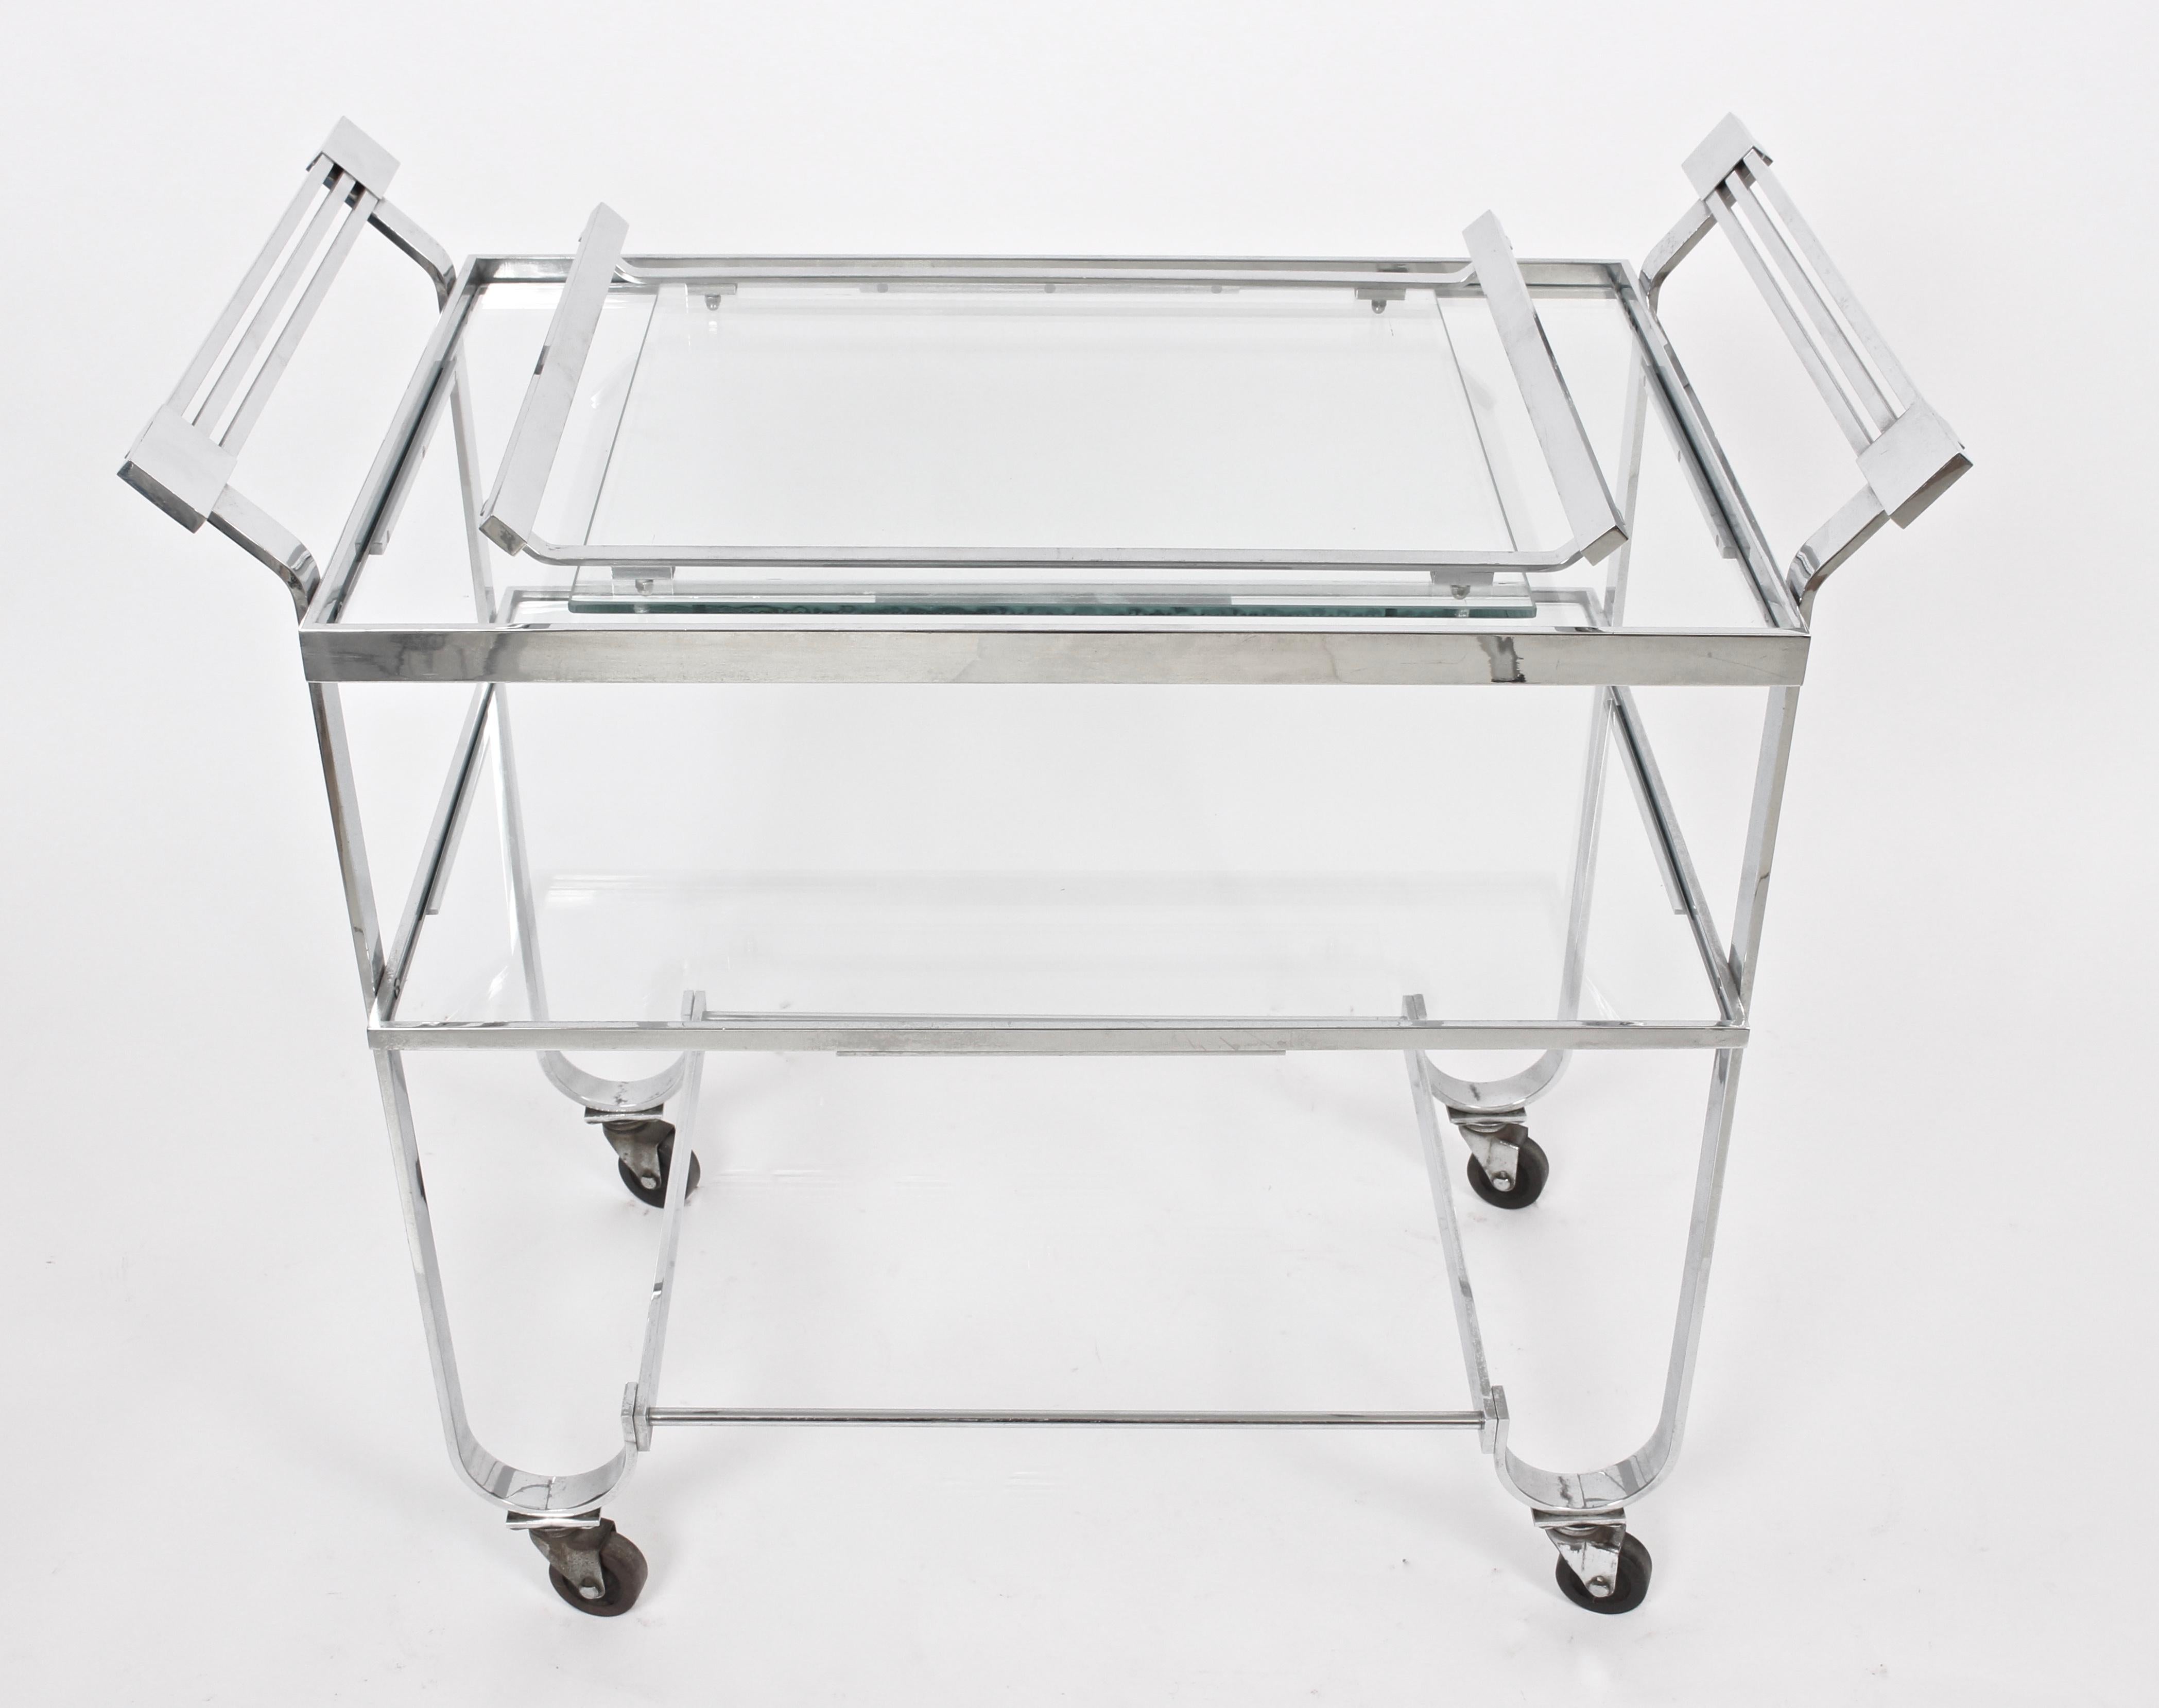 Classic Treitel-Gratz New York Art Deco bar cart - tea trolley - serving cart with removable lower serving tray. Featuring a lipped rectangular chrome frame with casters and three recessed glass shelves. Measures: 24.5 H to top shelf. Treitel-Gratz